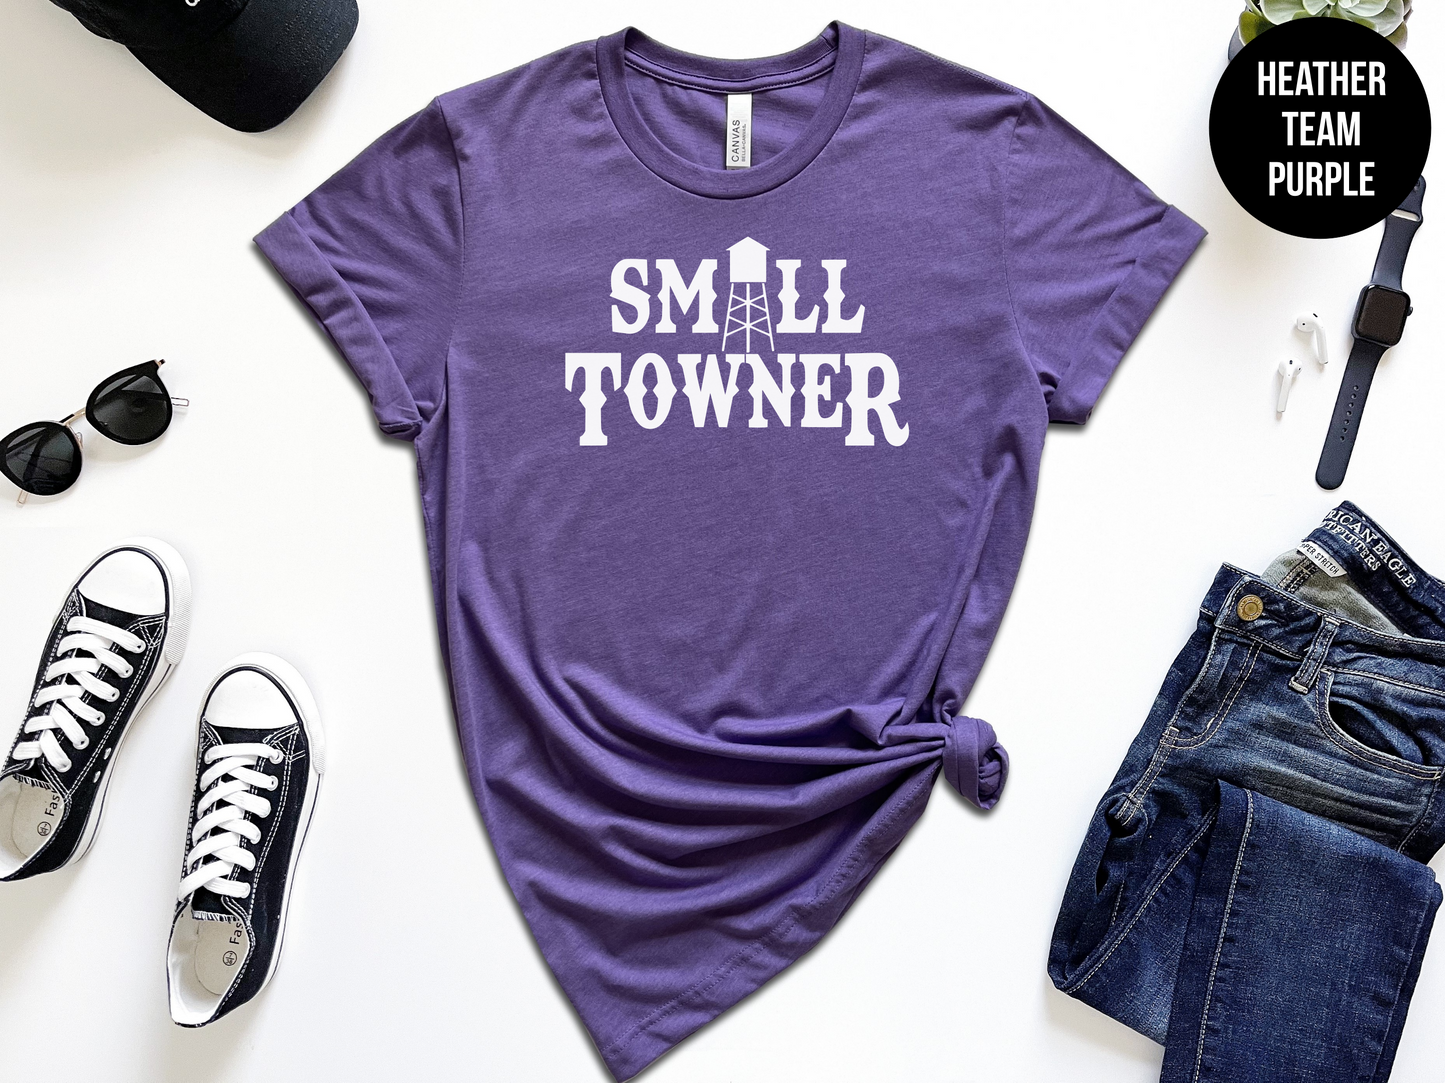 Small Towner